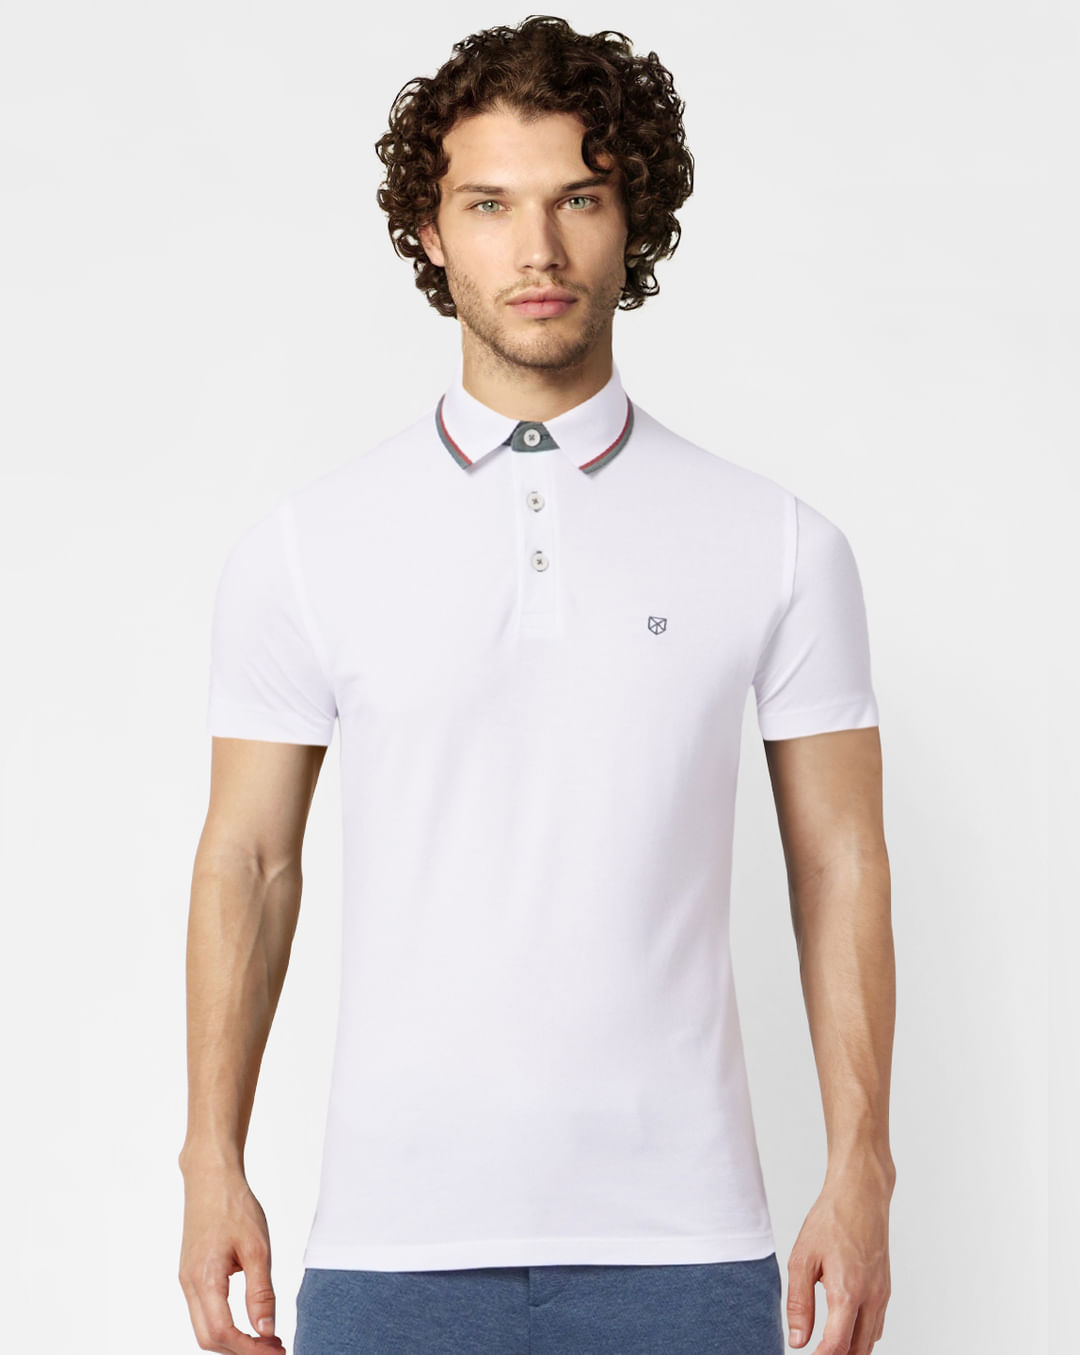 Buy White Polo Neck T-shirt Online in India - Flat 50% Off